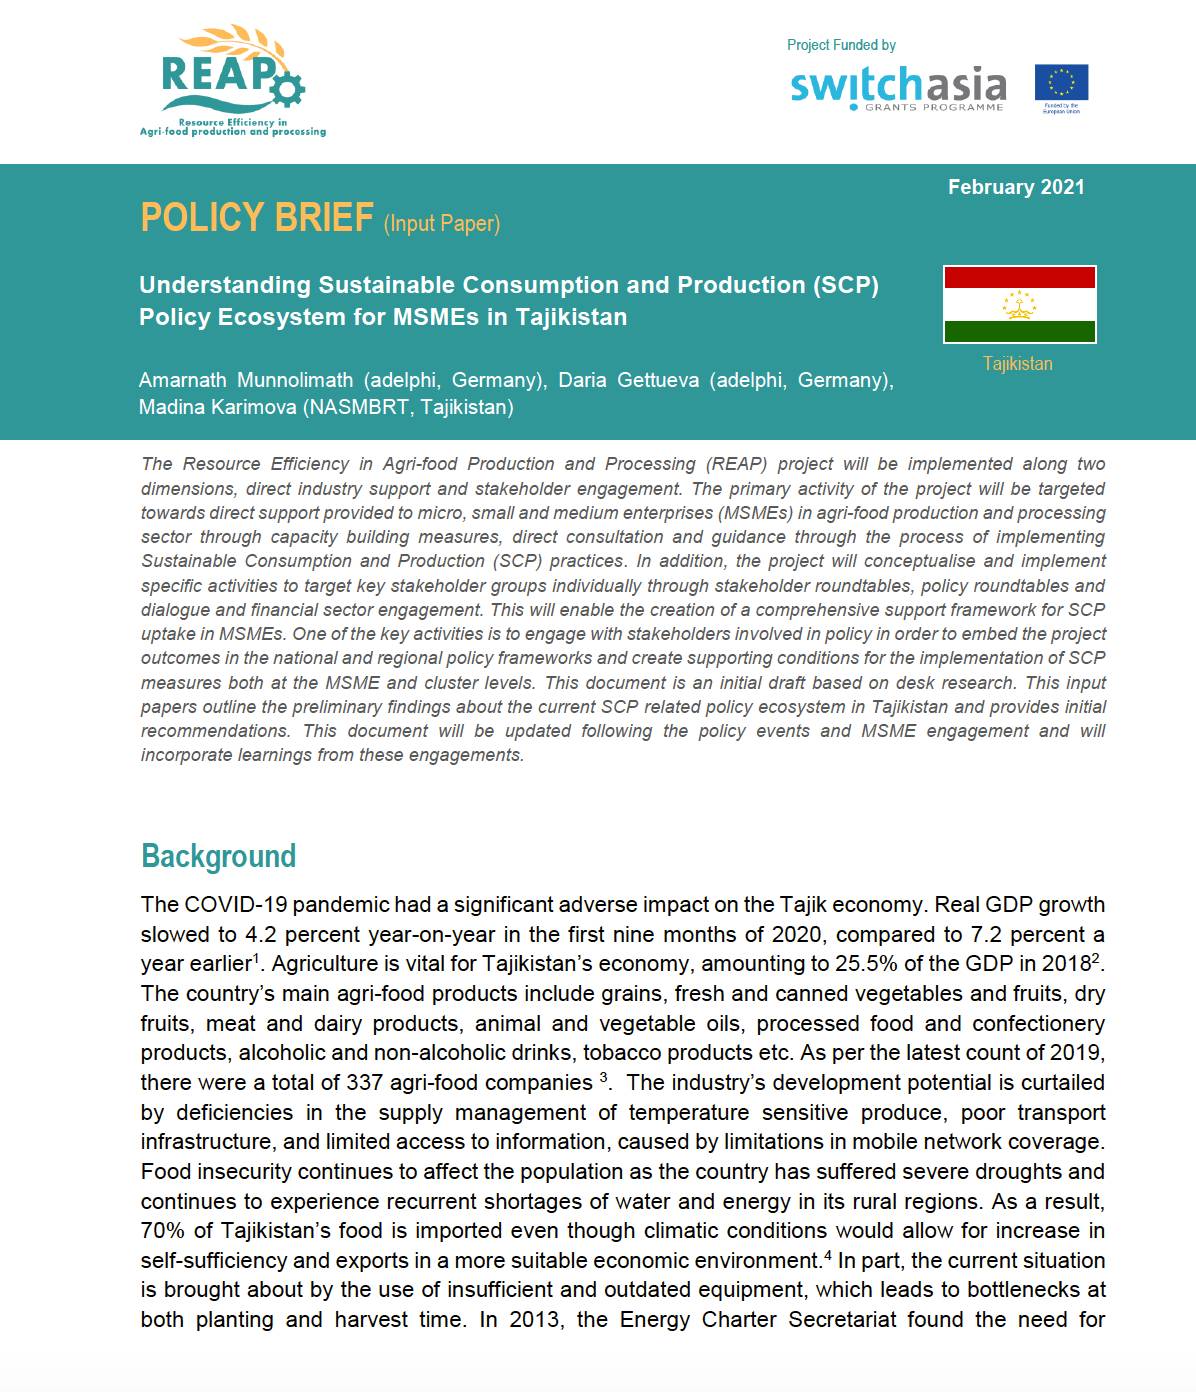 Policy Brief: Understanding SCP Policy Ecosystem for MSMEs in Tajikistan